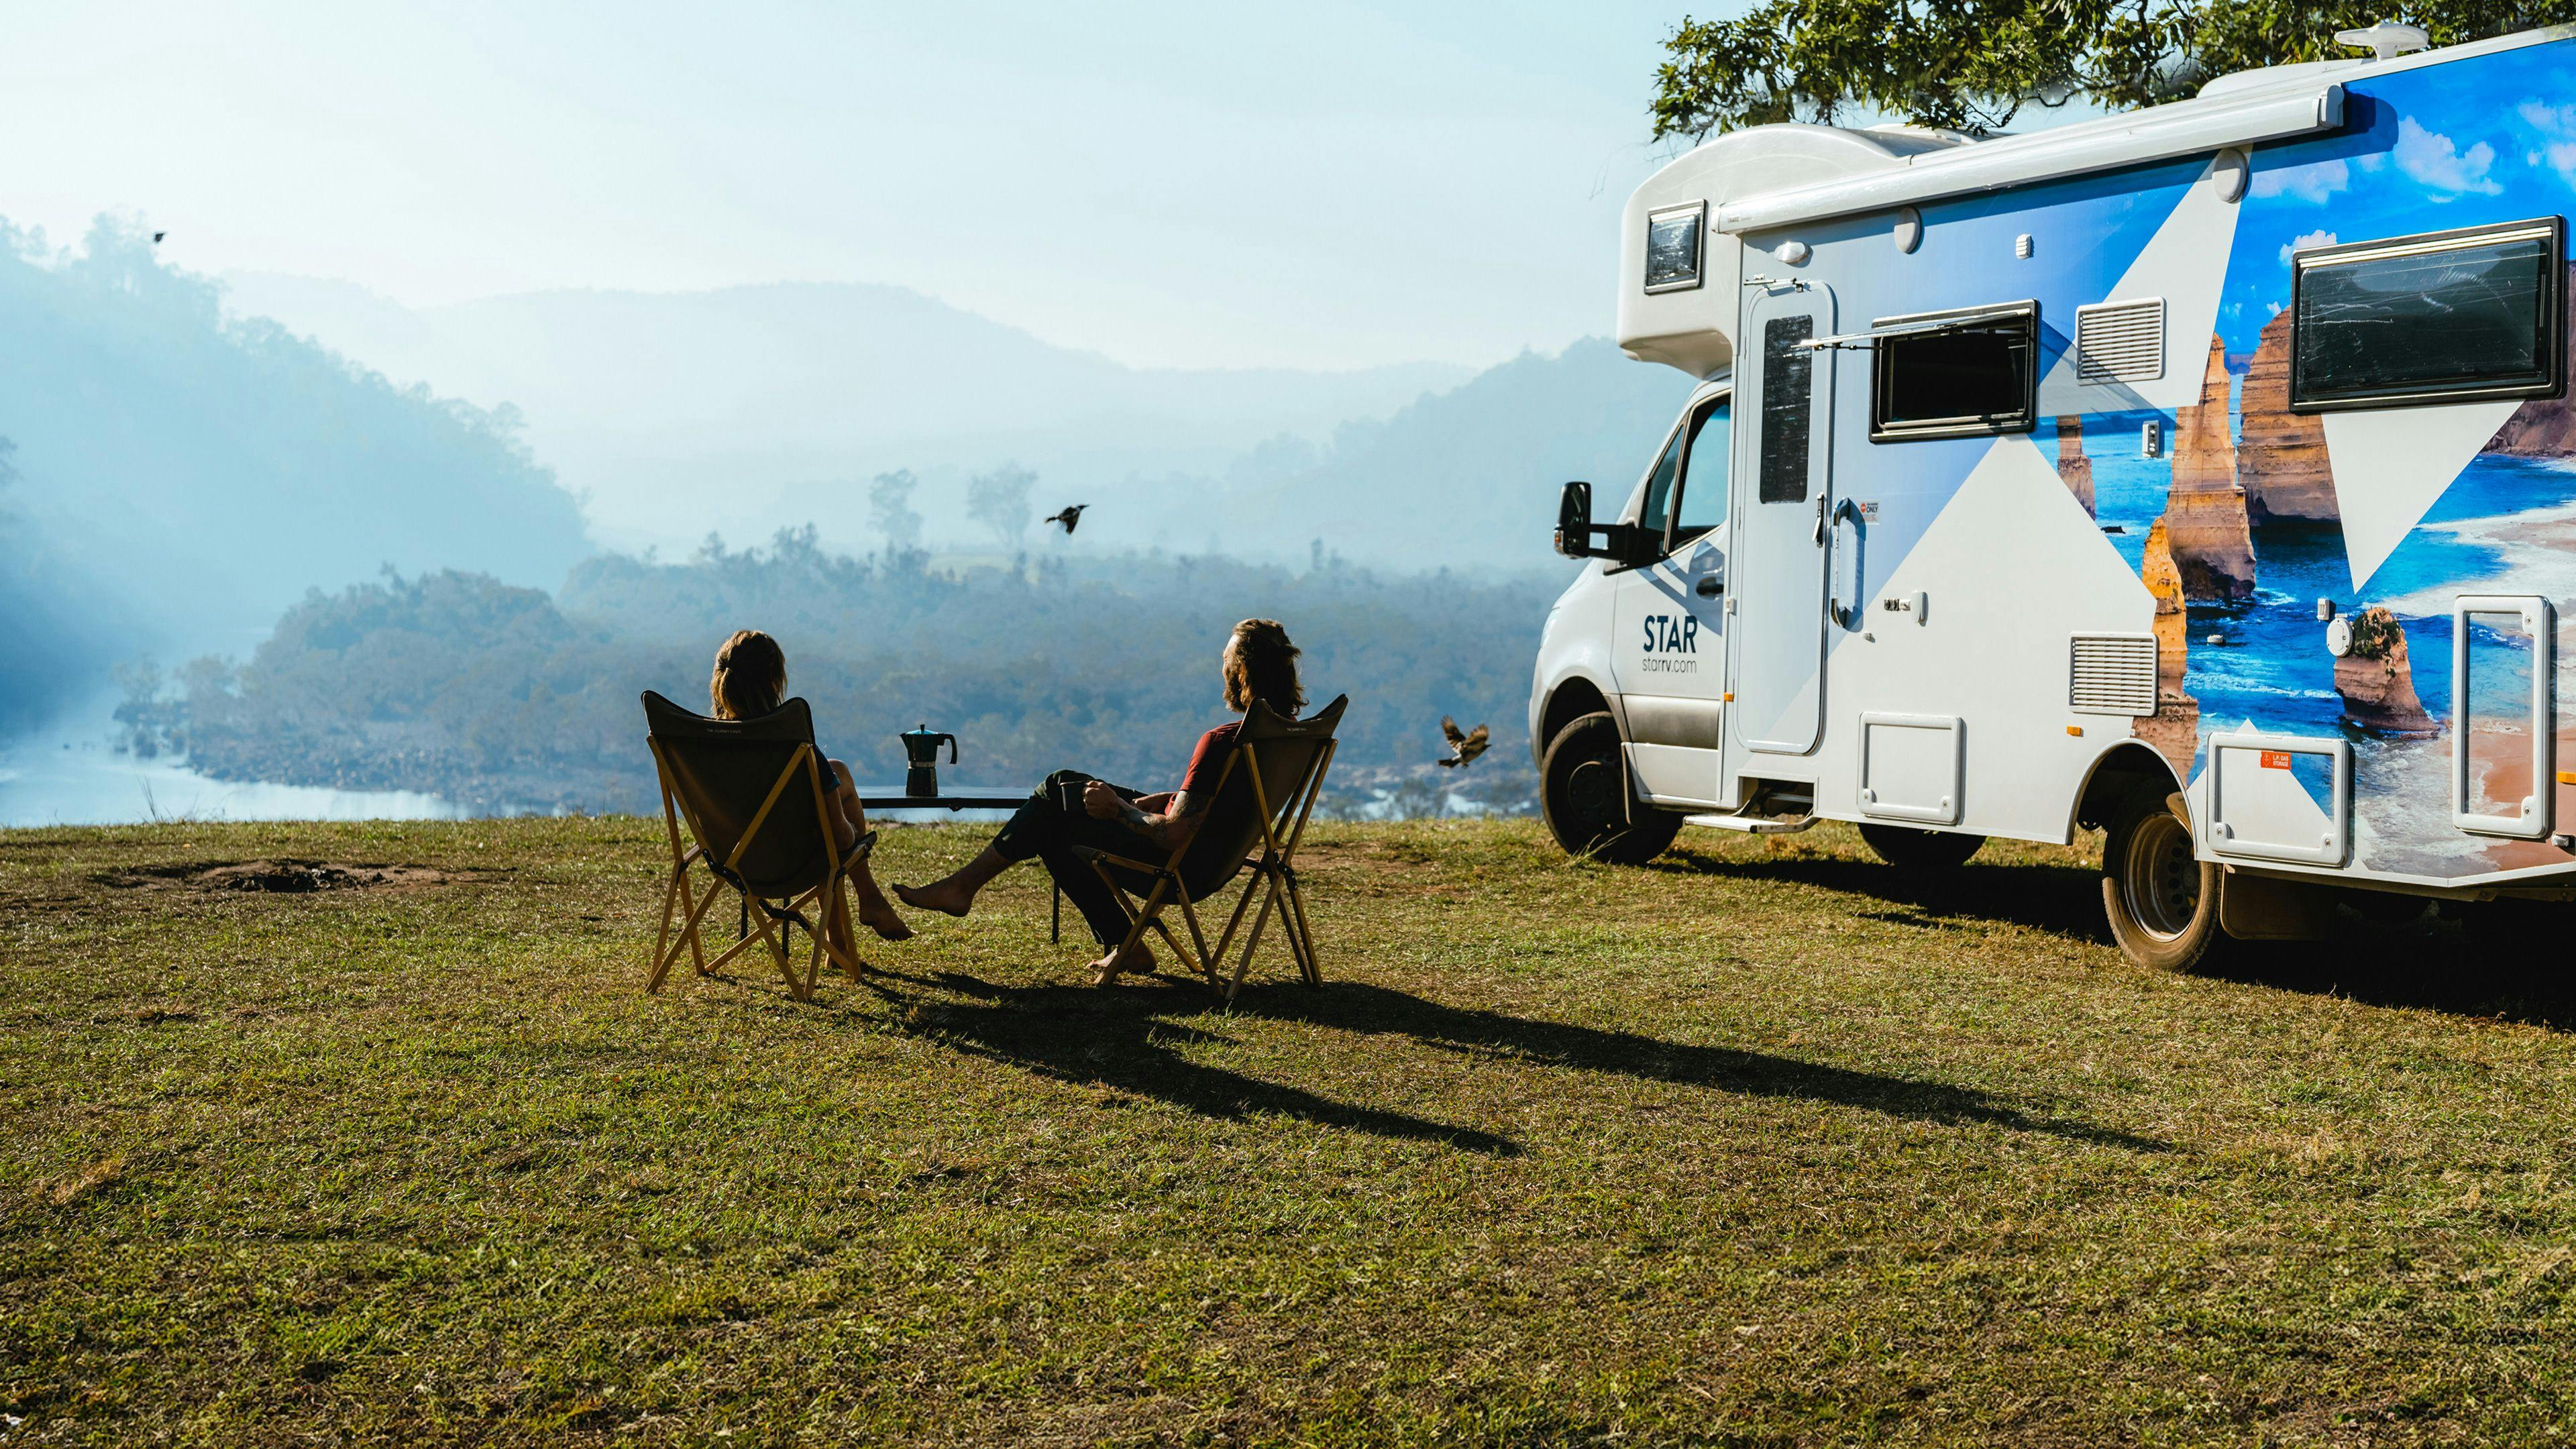 Couple relax in front of Star RV